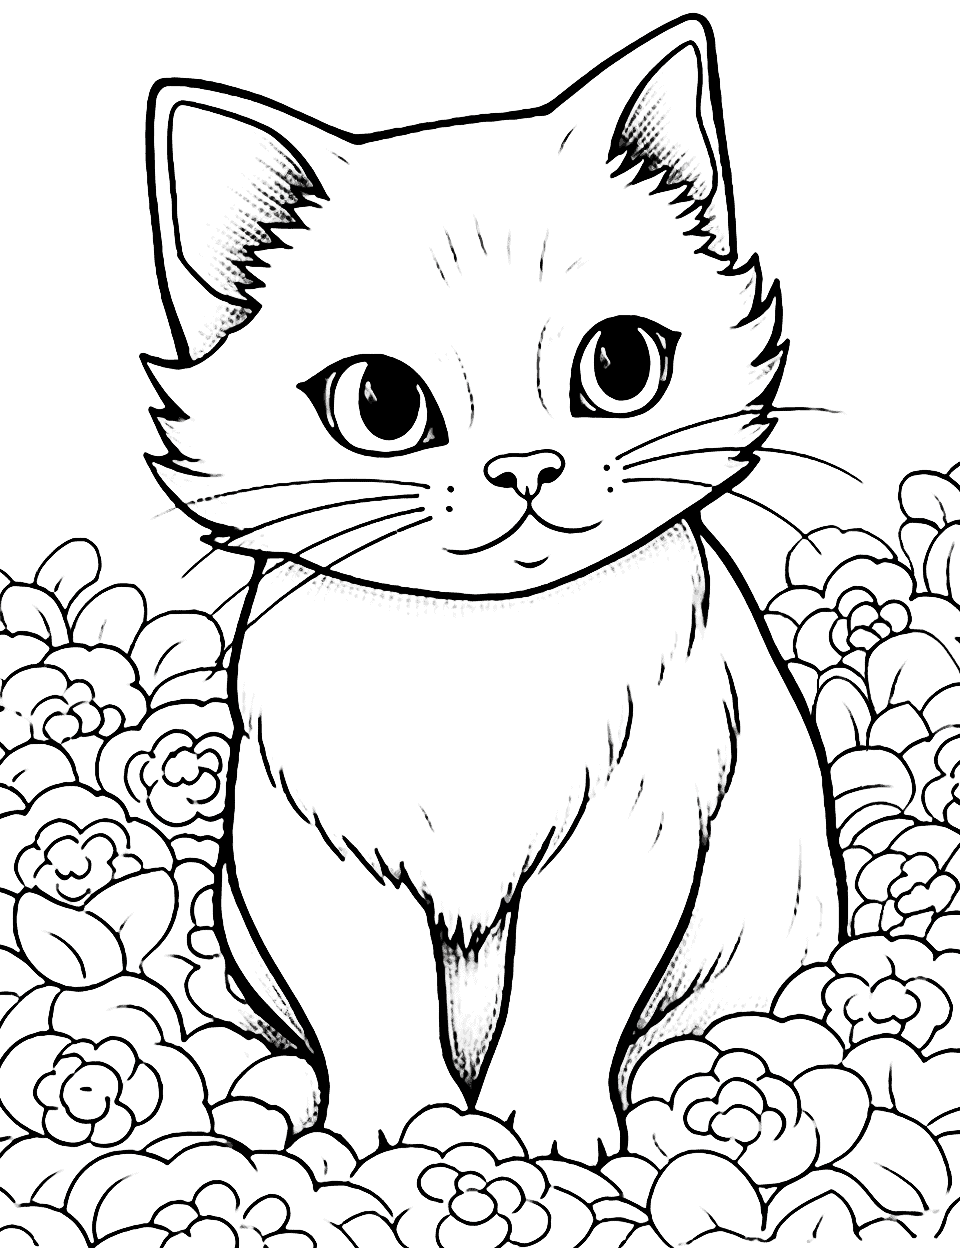 Cat in a Flower Field Coloring Page - A blissful cat lying in a field of vibrant, blooming flowers.